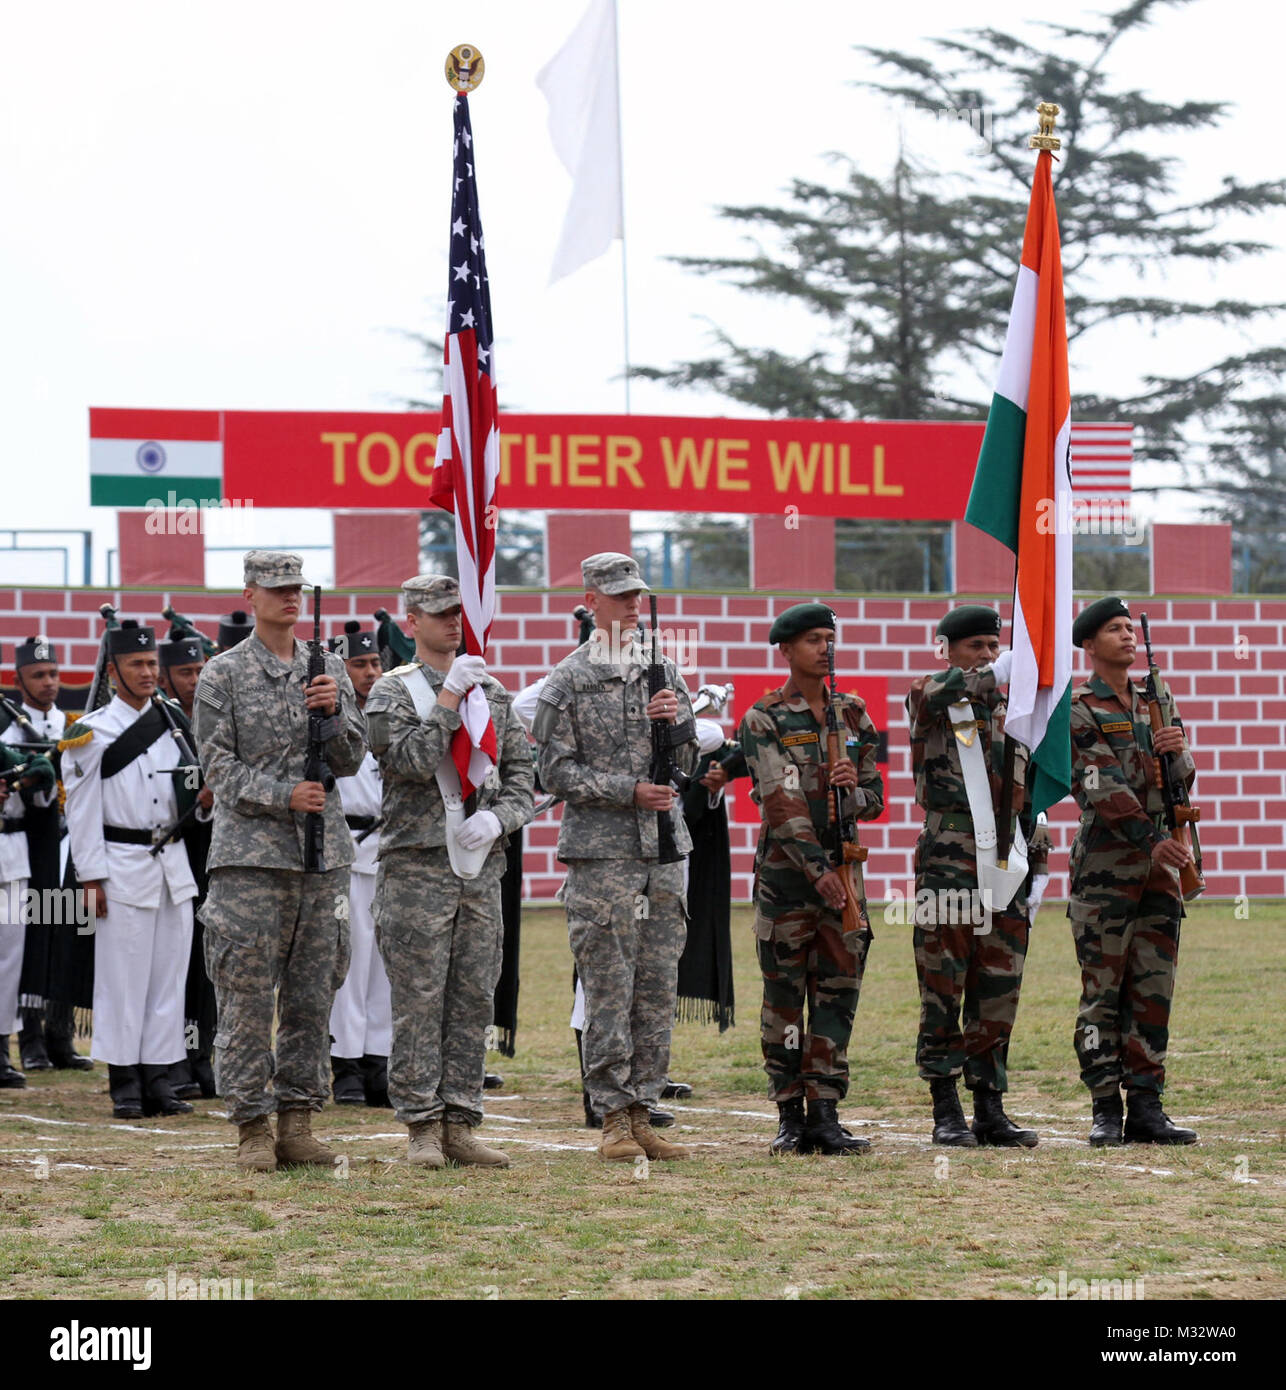 Soldiers from 1st Stryker Brigade Combat Team, 25th Infantry Division and the 2nd Battalion, 9th Ghurak Regiment of the Indian Army present their national colors during the closing ceremonies for exercise Yudh Abhyas 14 at Chaubattia, India Sept. 30, 2014. More than 100 U.S. Soldiers participated in the exercise, which began Sept. 17 and too place at Ranikhet Cantonment, Utterakhand, India. Yudh Abhyas is an U.S. Army Pacific Command sponsored exercise and is geared toward enhancing cooperation and coordination through training and cultural exchanges and building skills and relationships neces Stock Photo